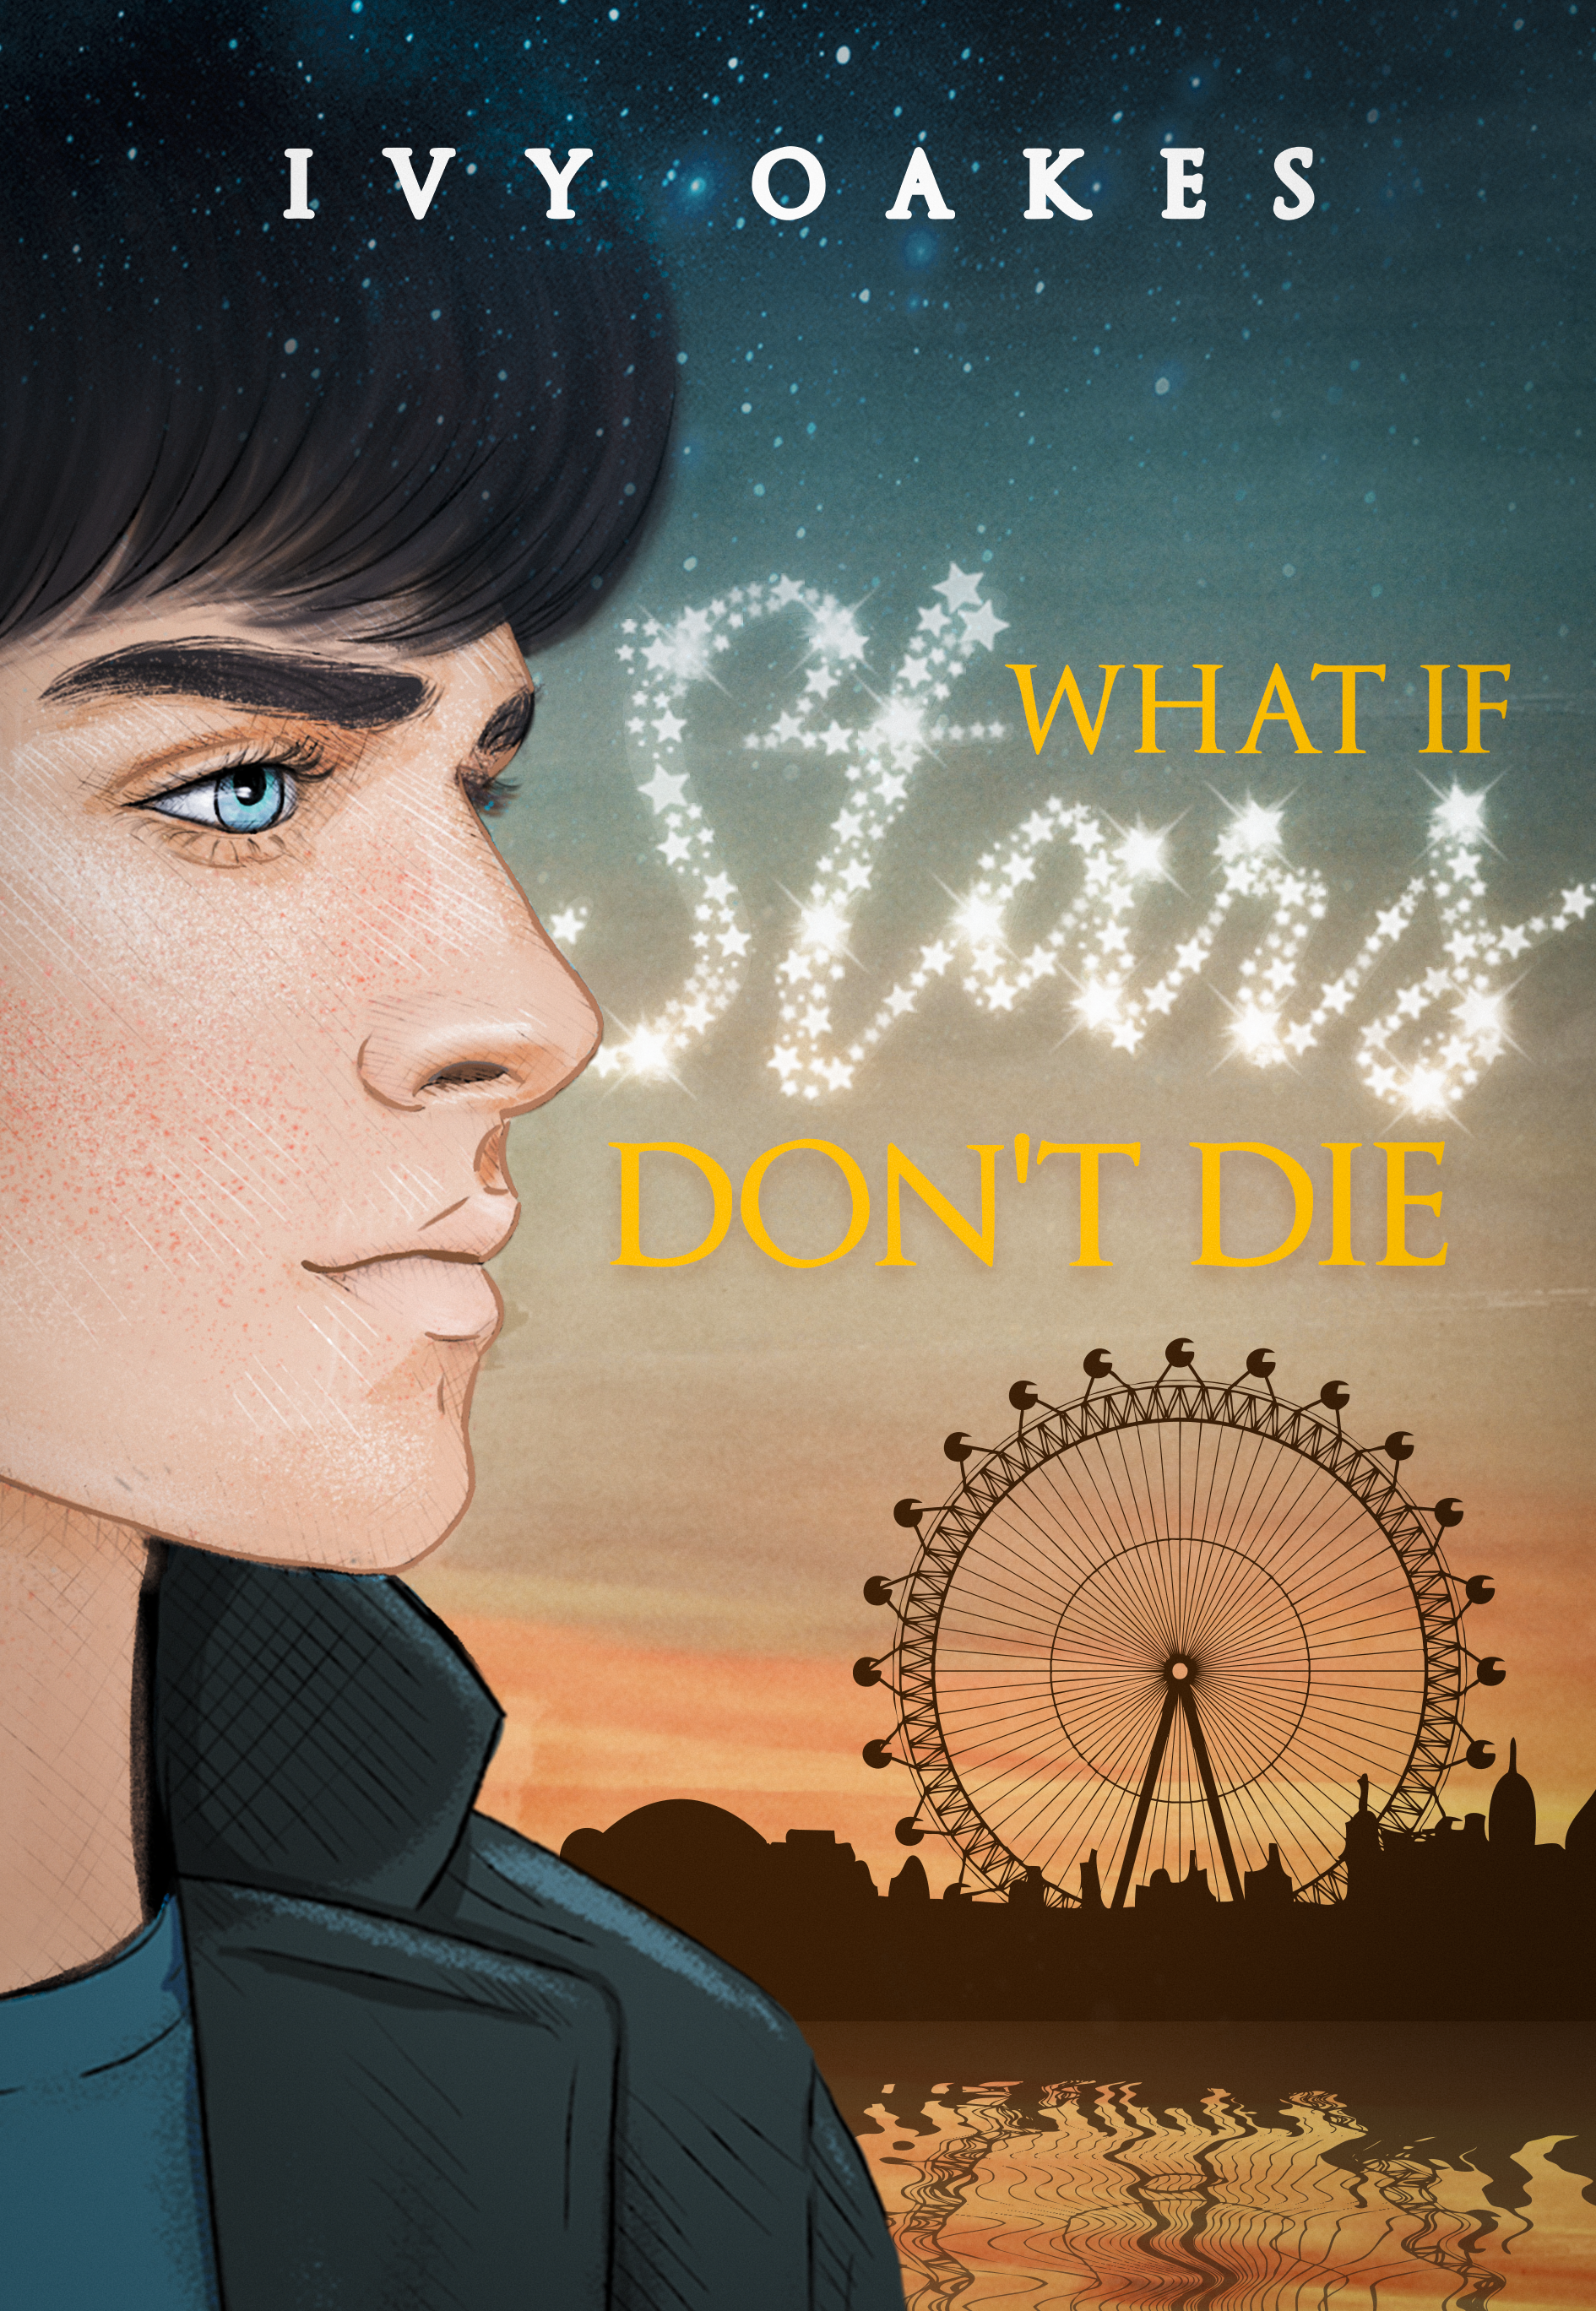 FREE: What if Stars Don’t Die by Ivy Oakes